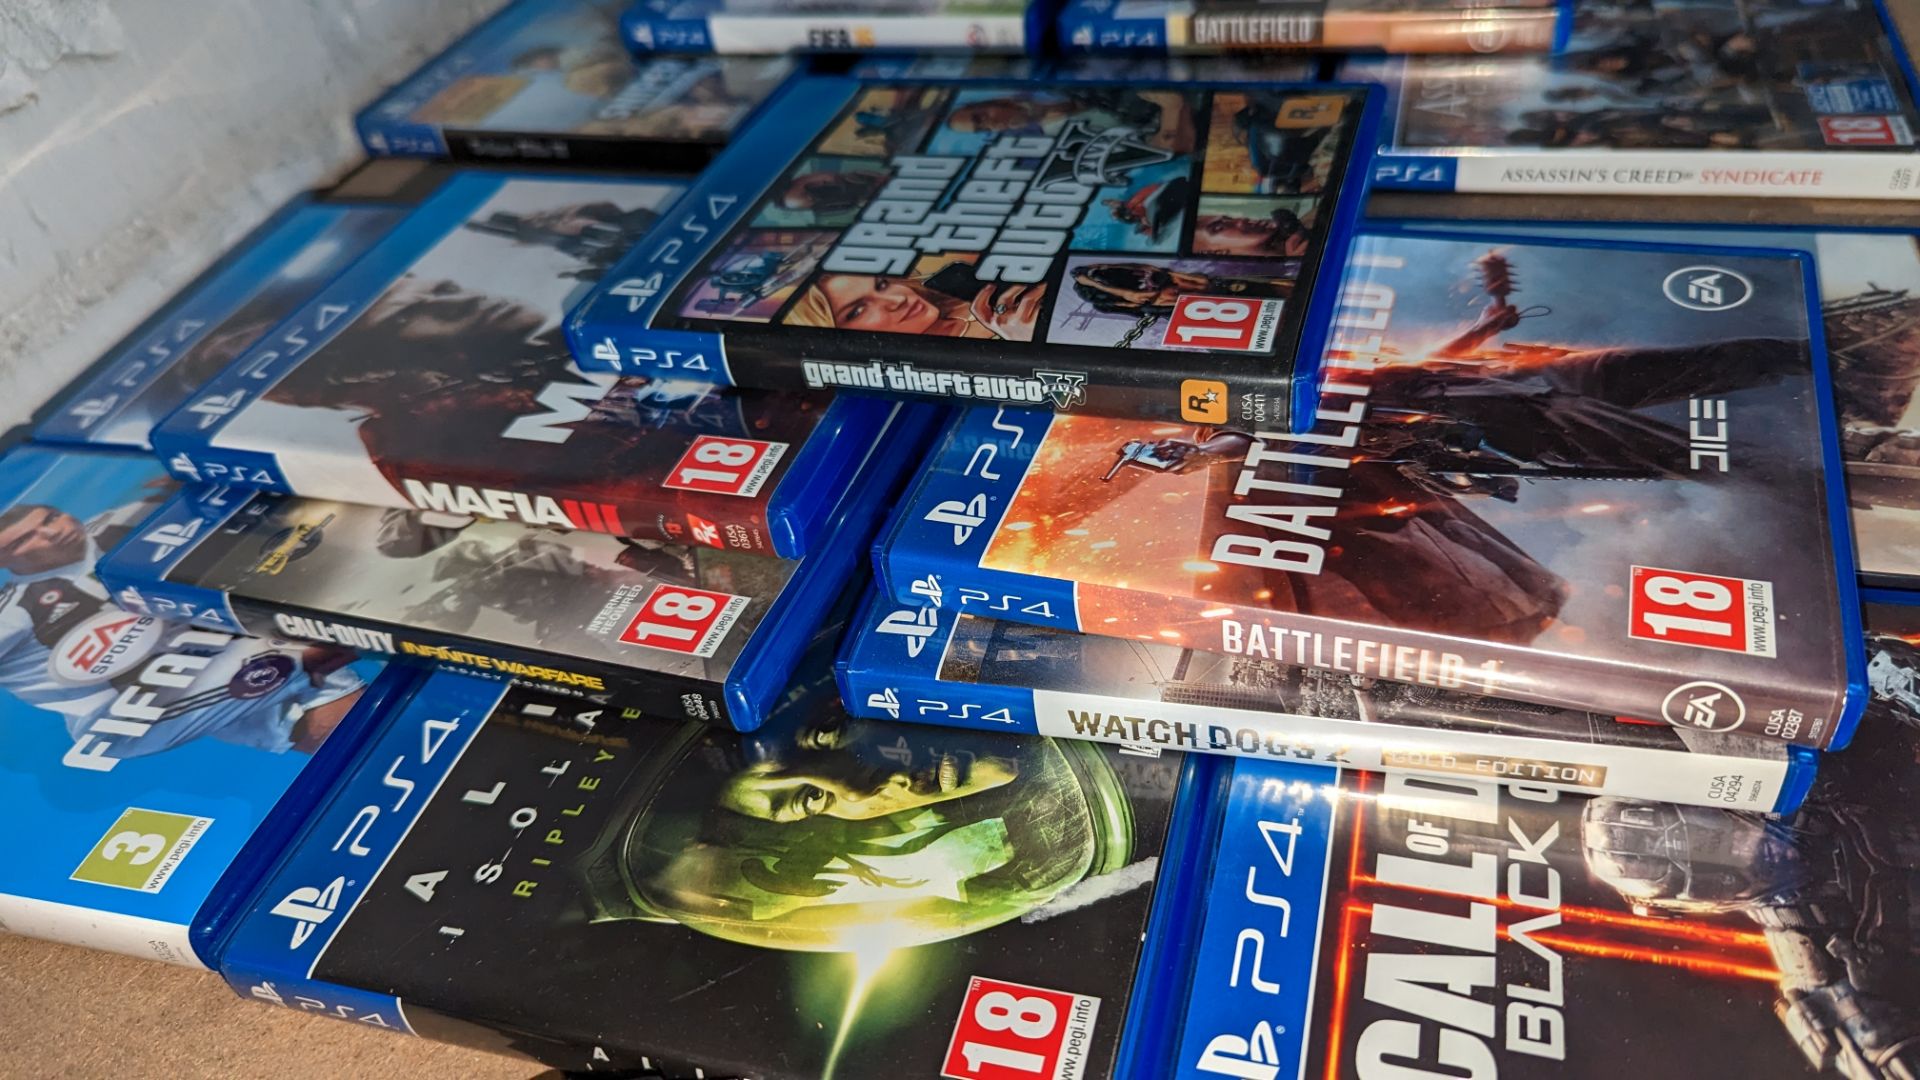 11 off boxed PS4 games as pictured - Image 3 of 10